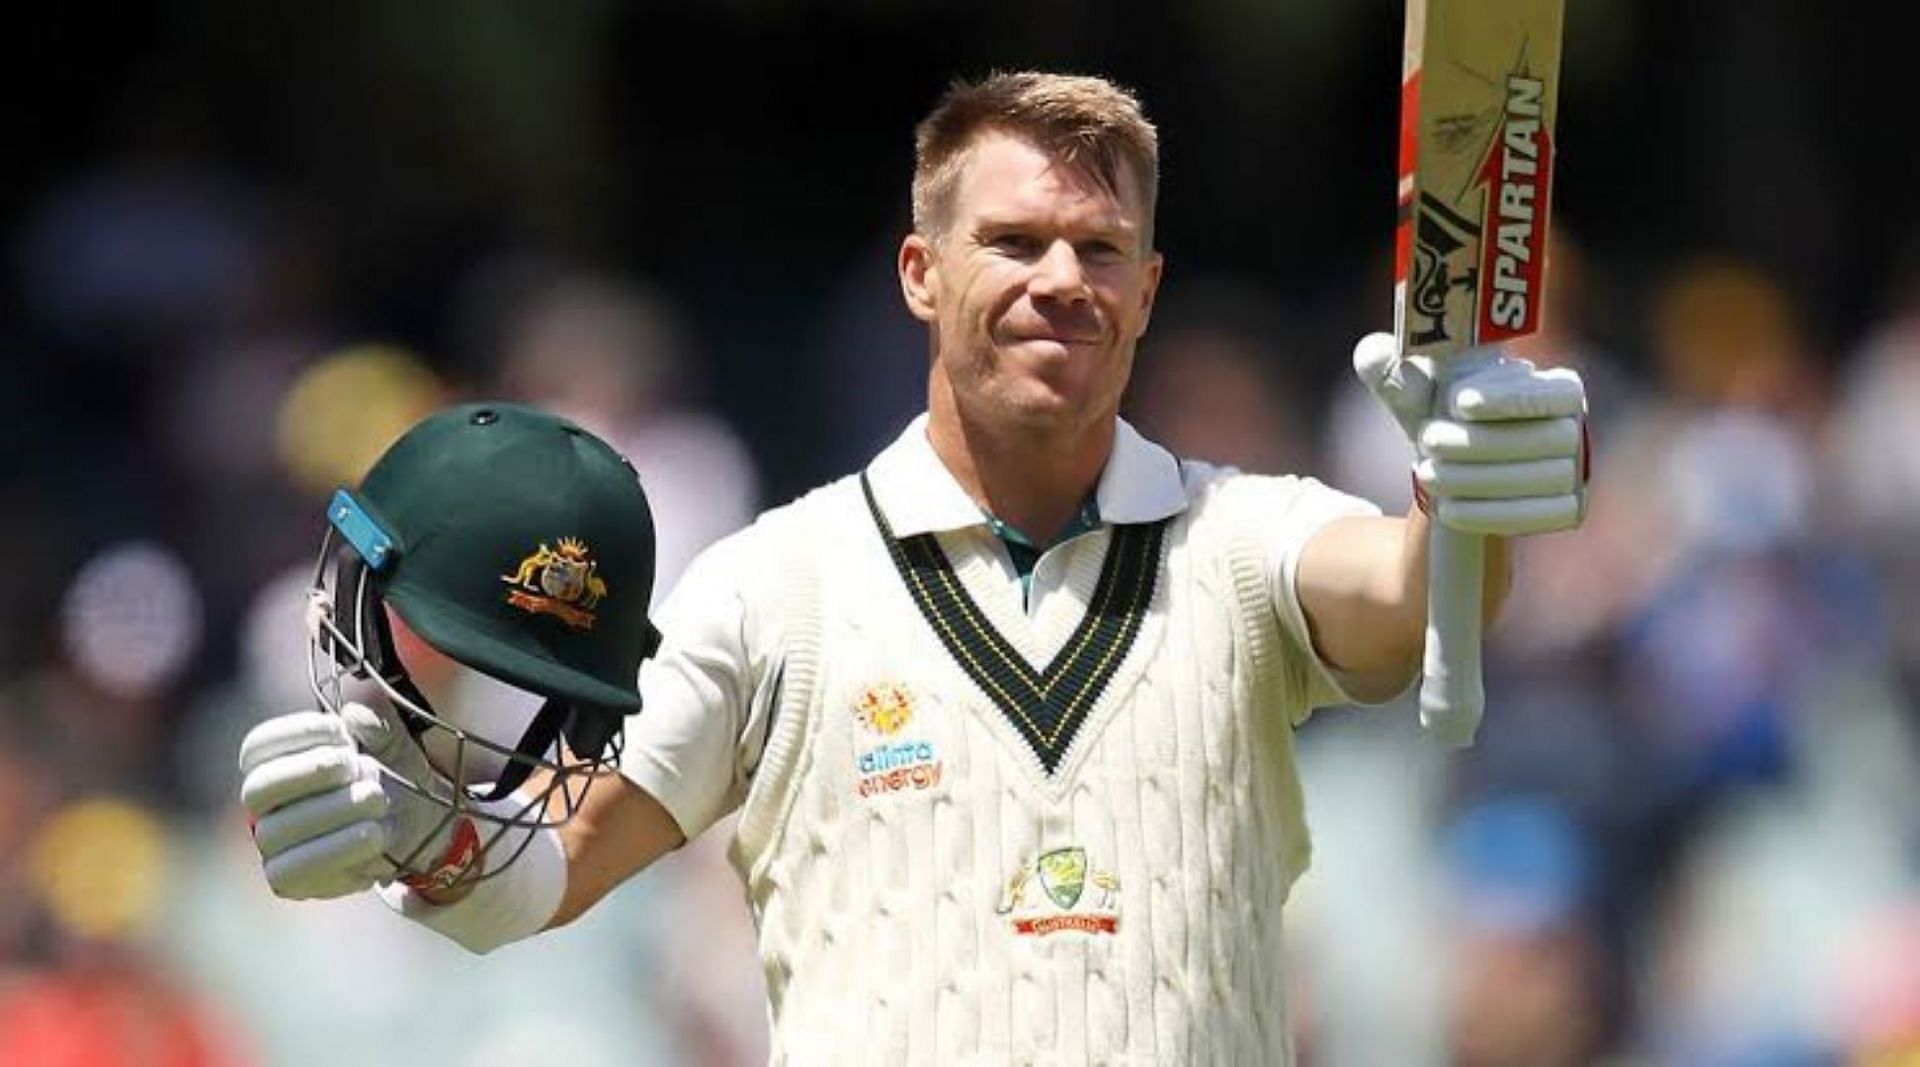 David Warner has been one of the long serving Test cricketers for Australia